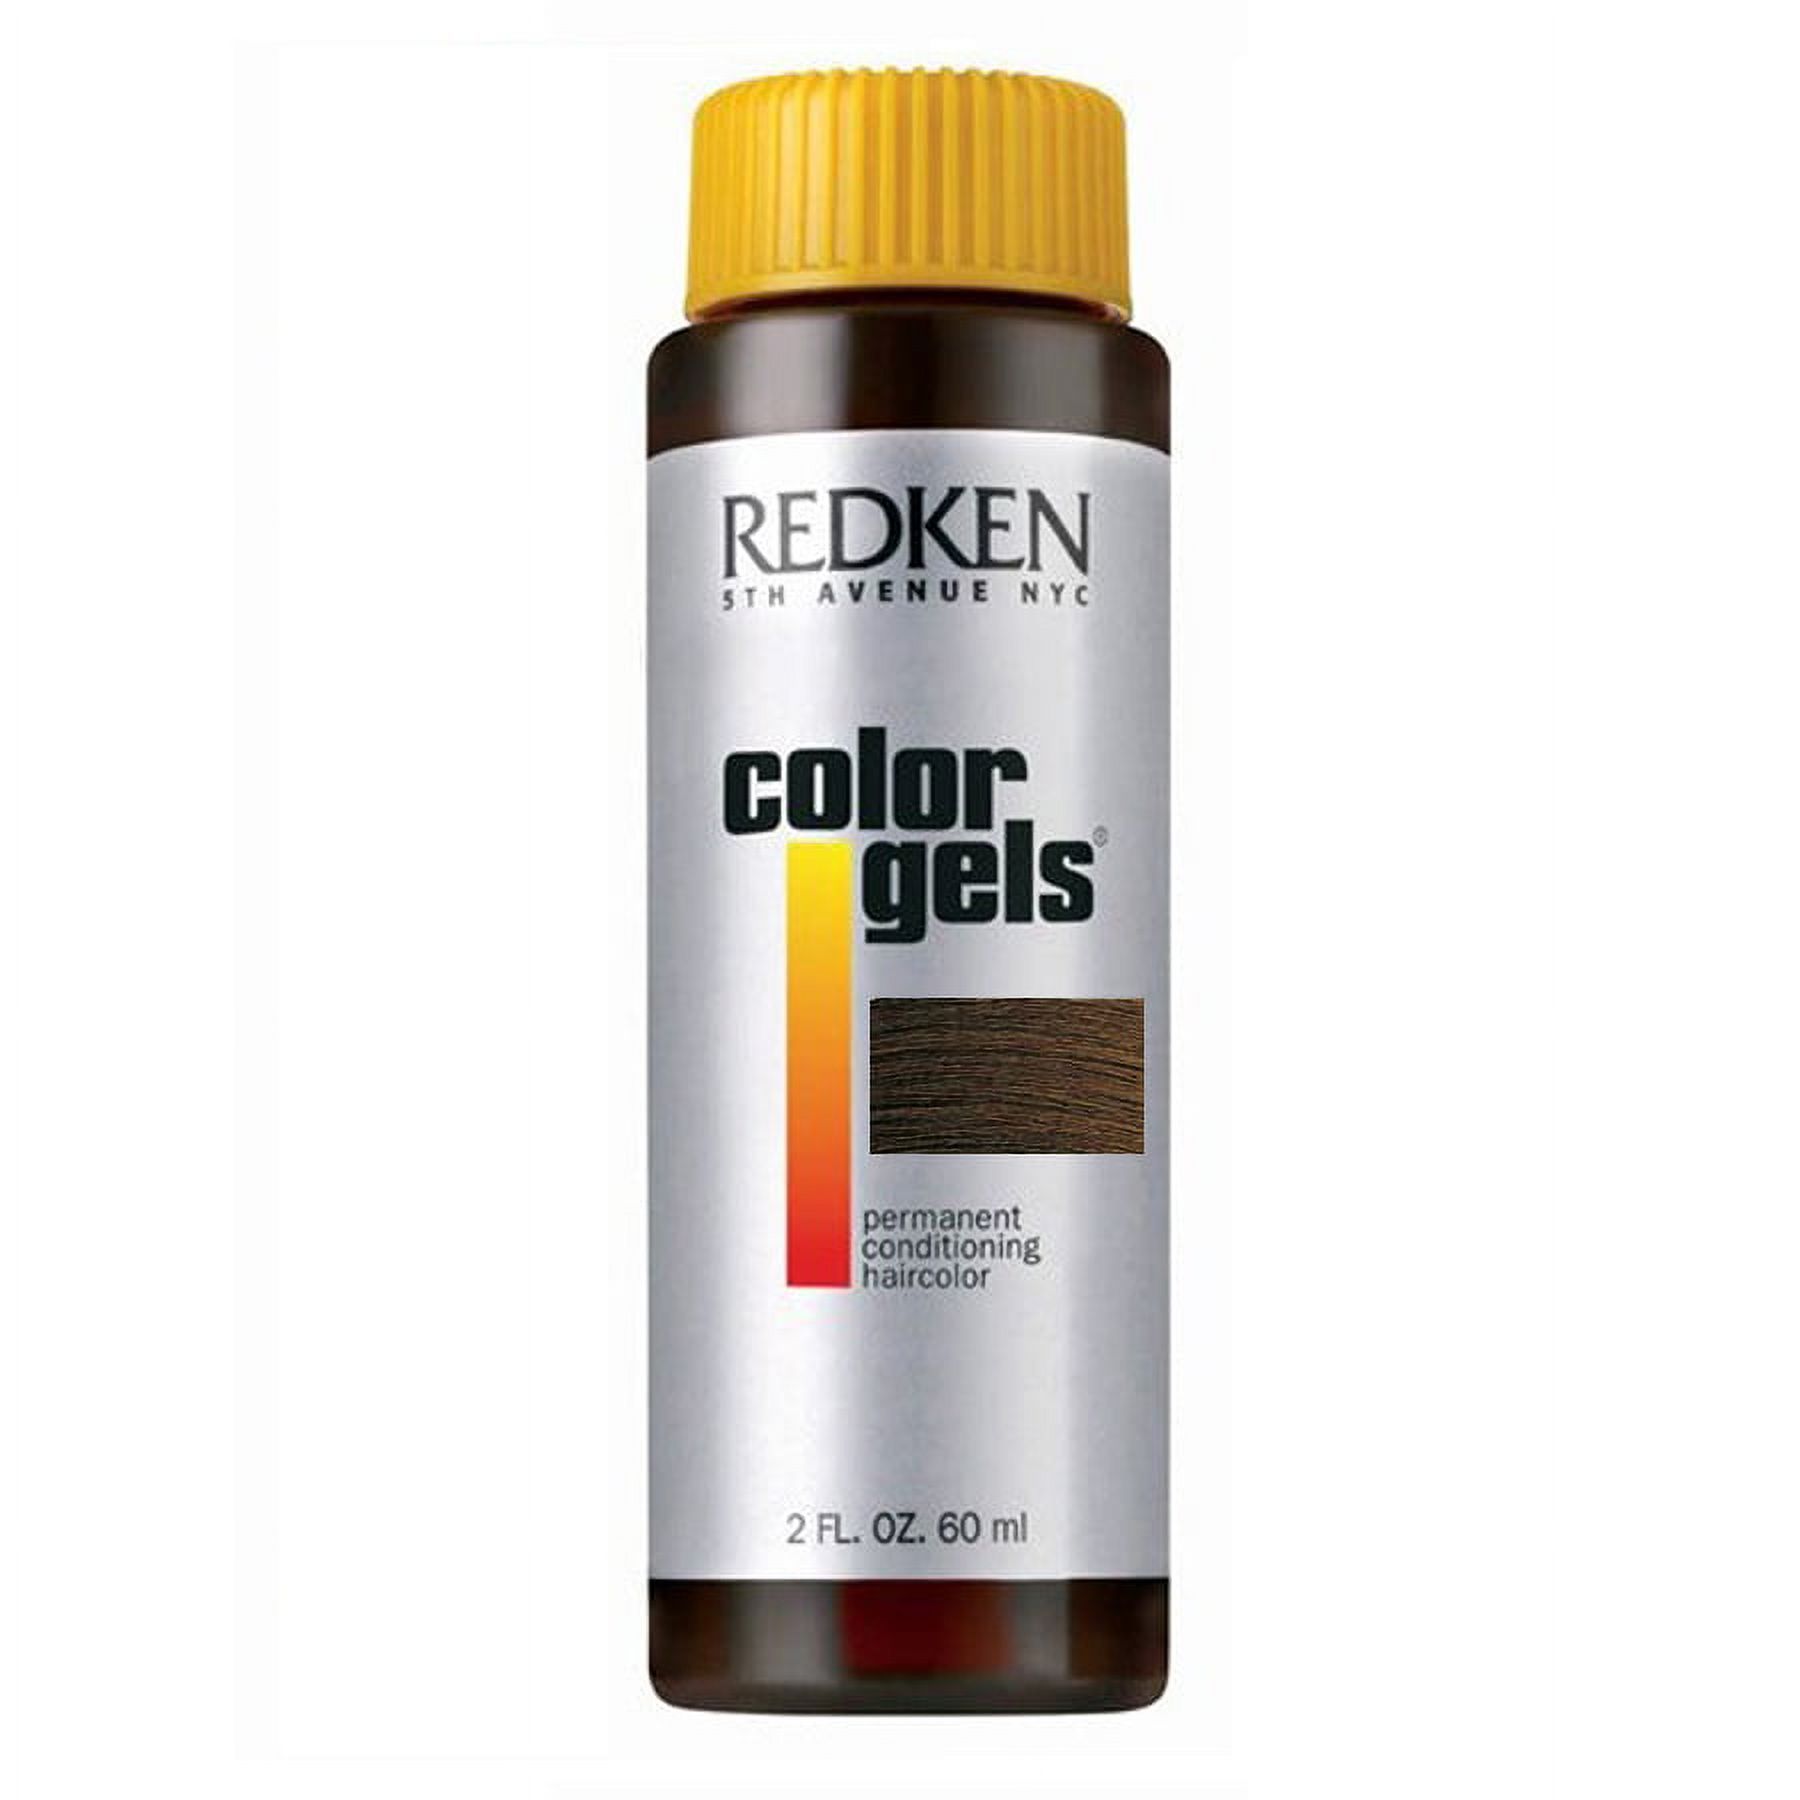 Redken Color Gels Permanent Conditioning Haircolor (Color : 4NG-Pecan) - image 1 of 2